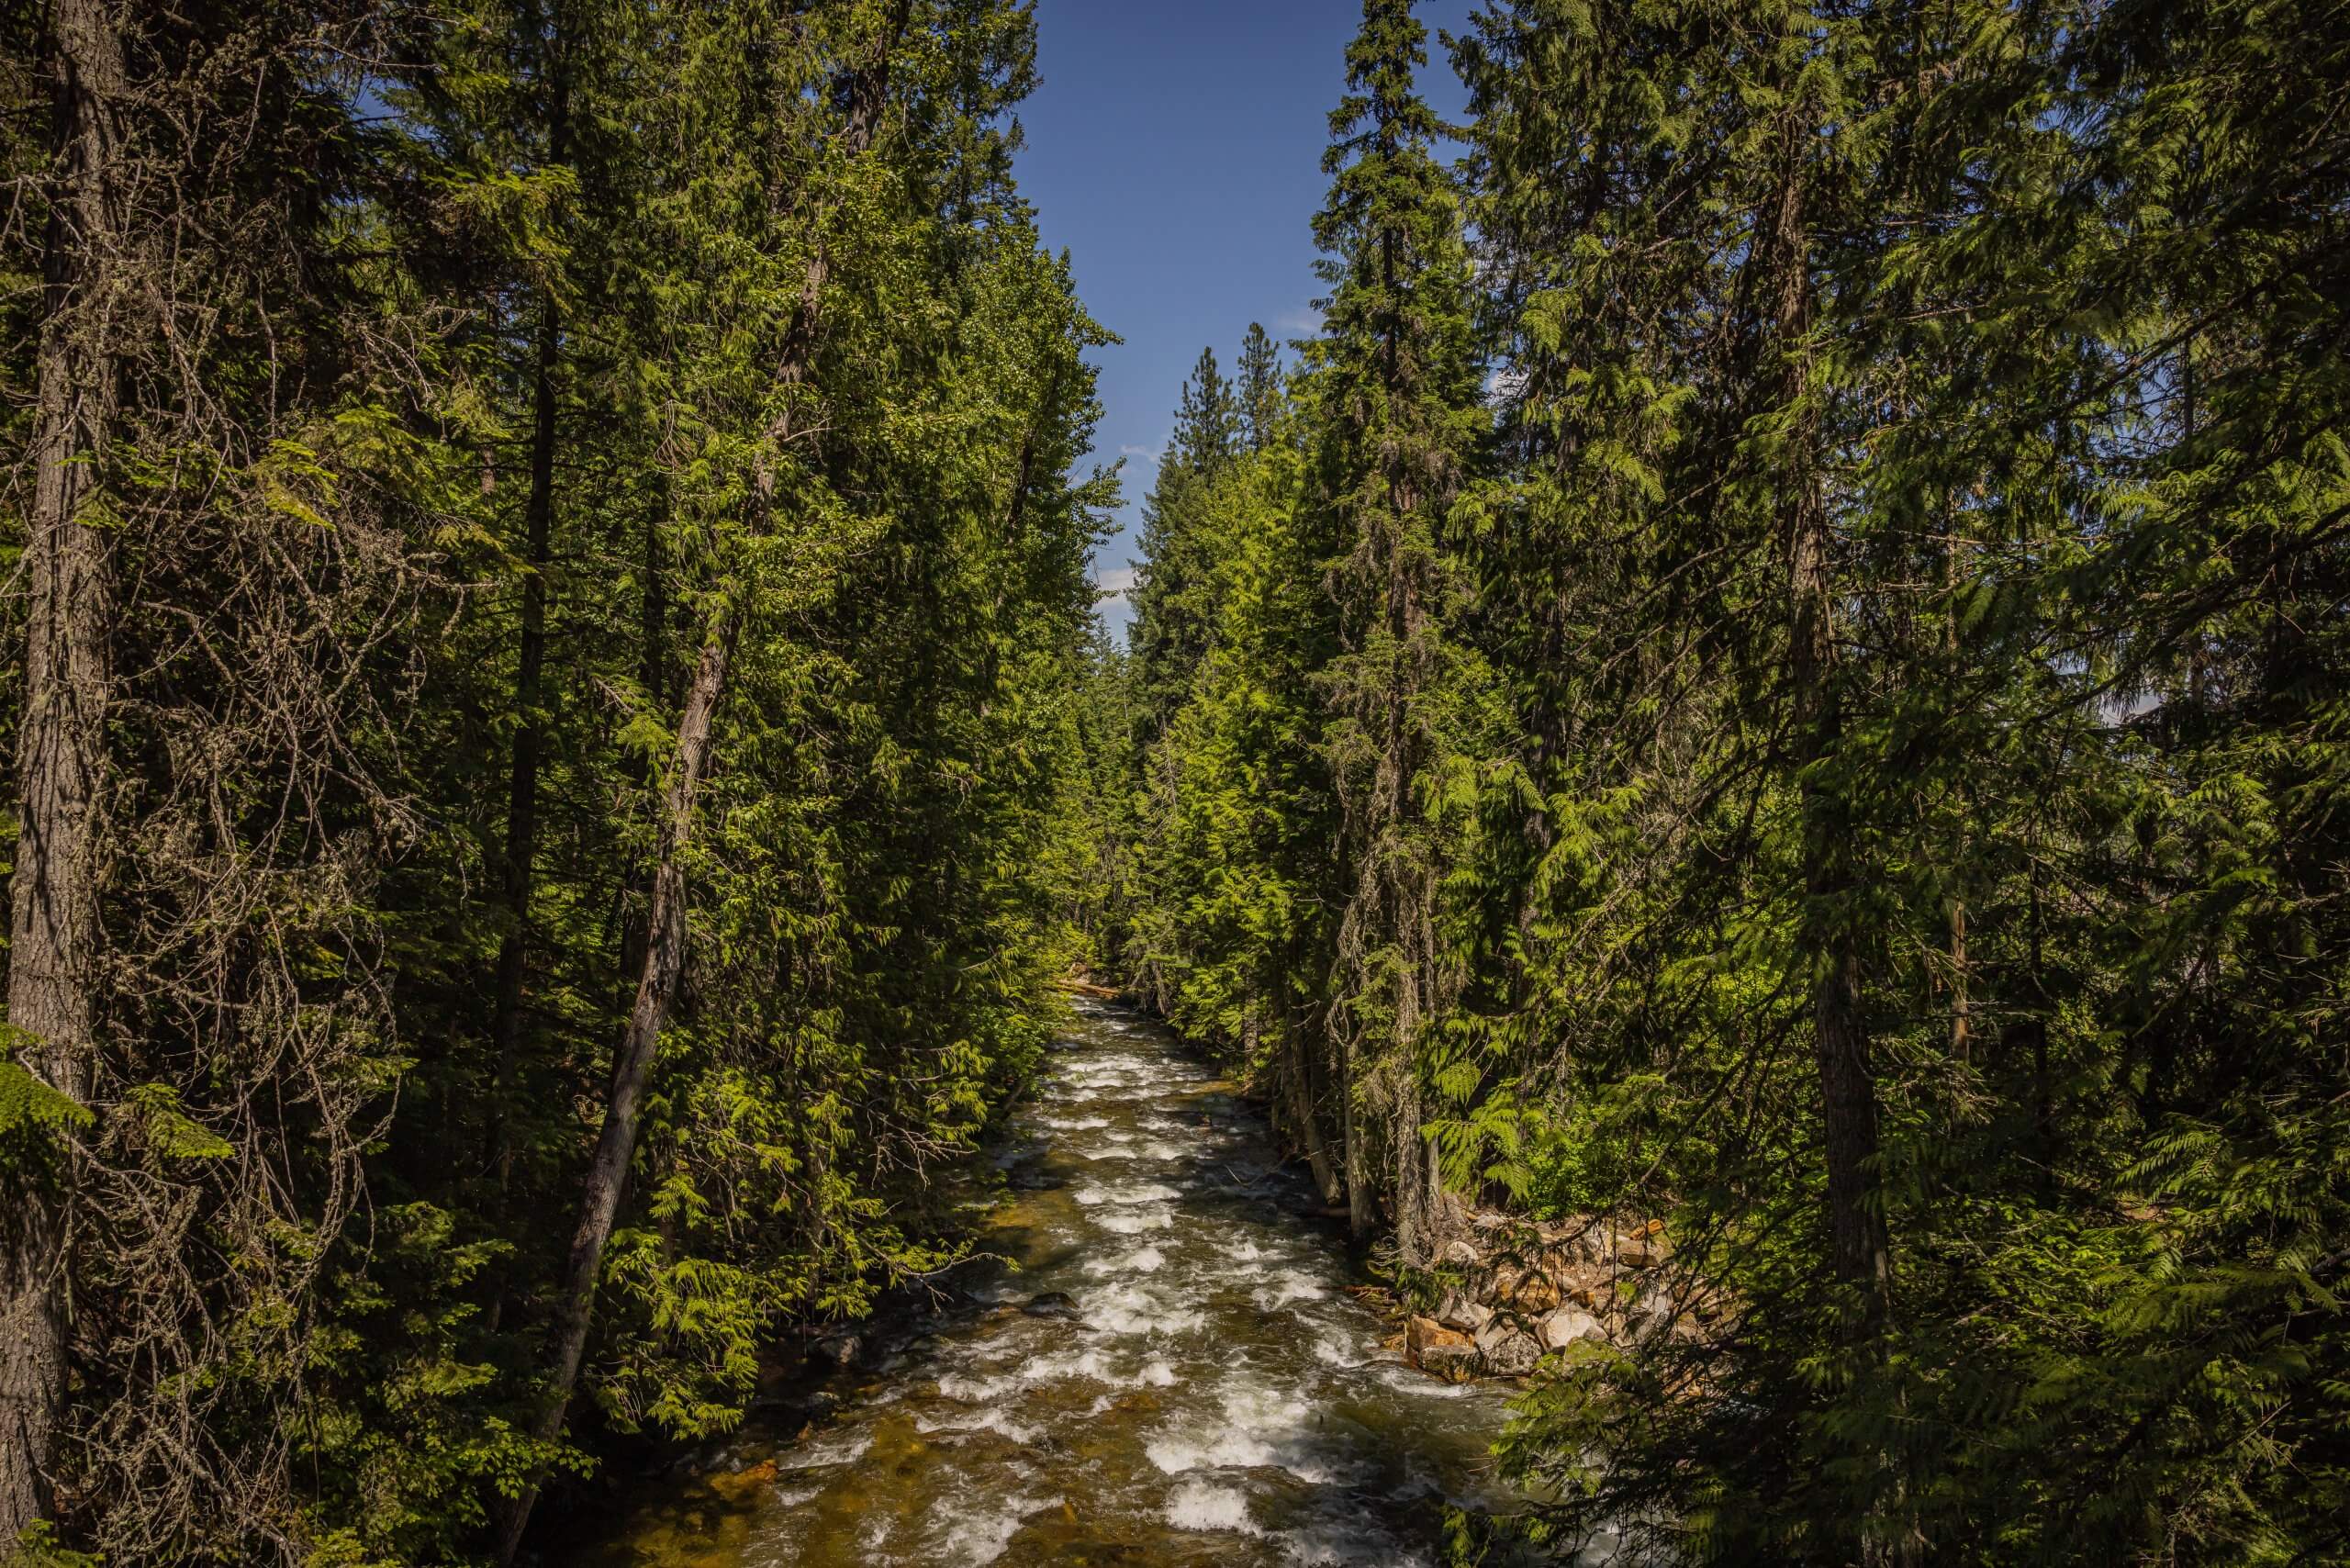 Looking down a stream surrounded by an evergreen forest in the Kootenai National Wildlife Refuge.